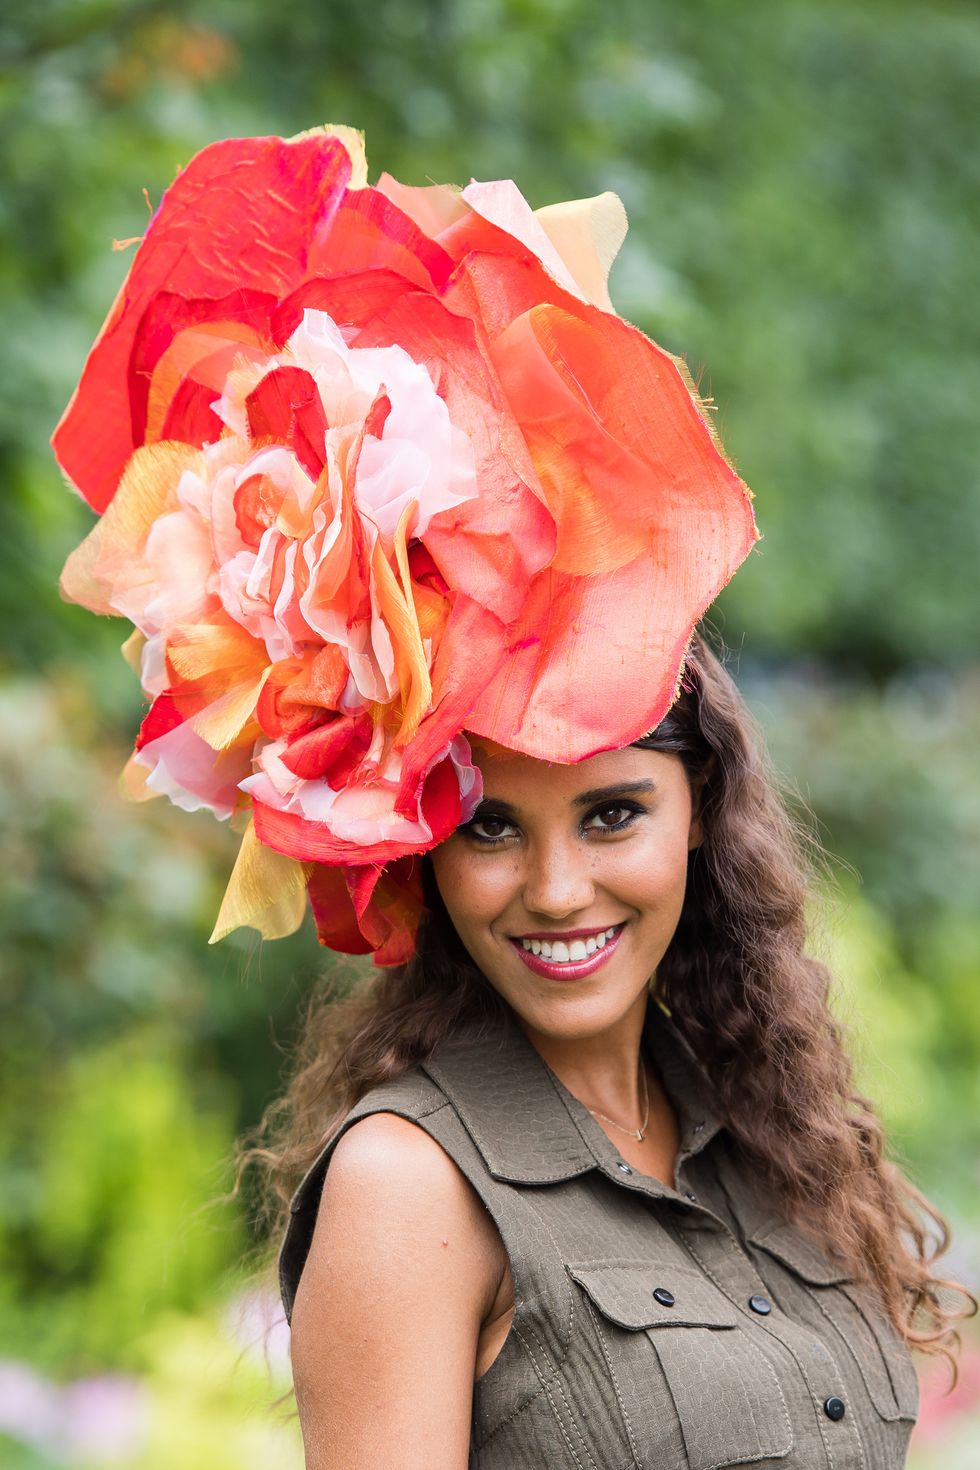 https://hips.hearstapps.com/hmg-prod.s3.amazonaws.com/images/hbz-royal-ascot-hats-gettyimages-978577564-1529432628.jpg?crop=1xw:1xh;center,top&resize=980:*